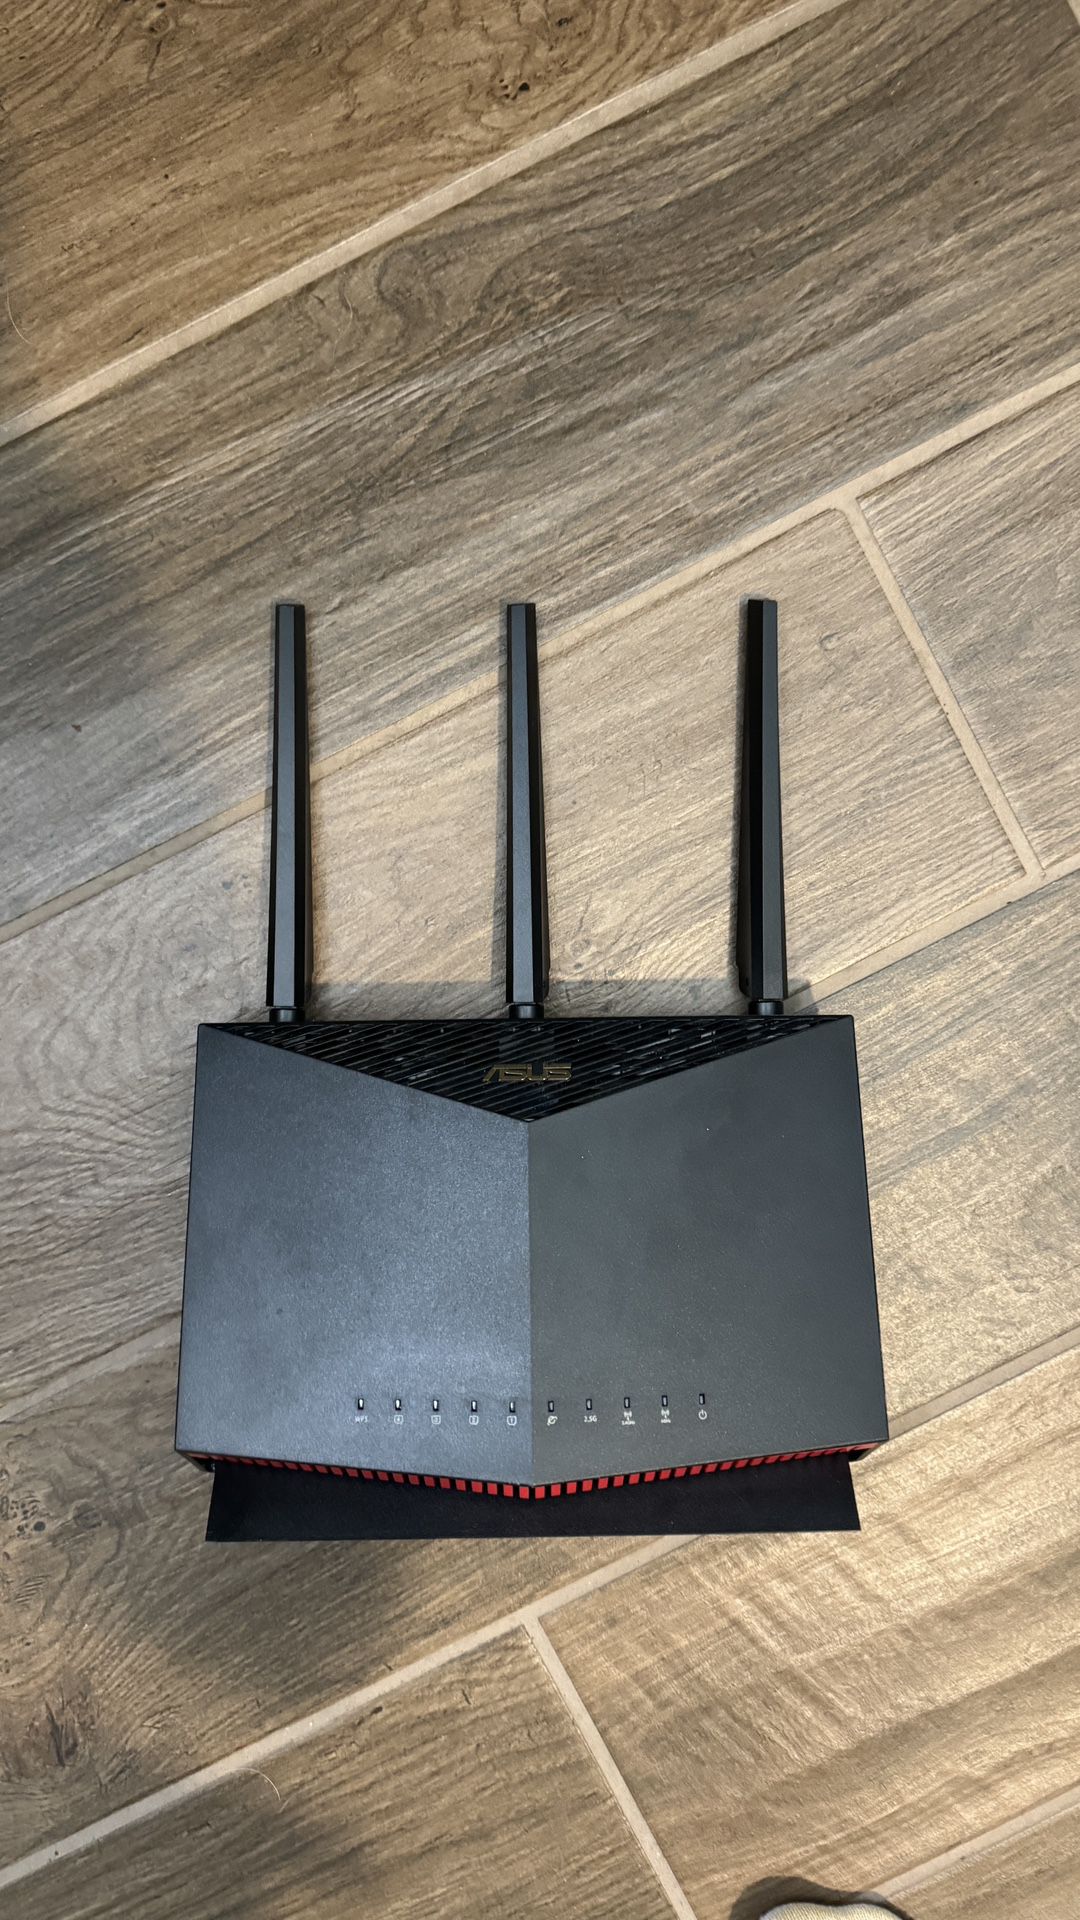 ASUS RT AX86U WiFi 6 Router